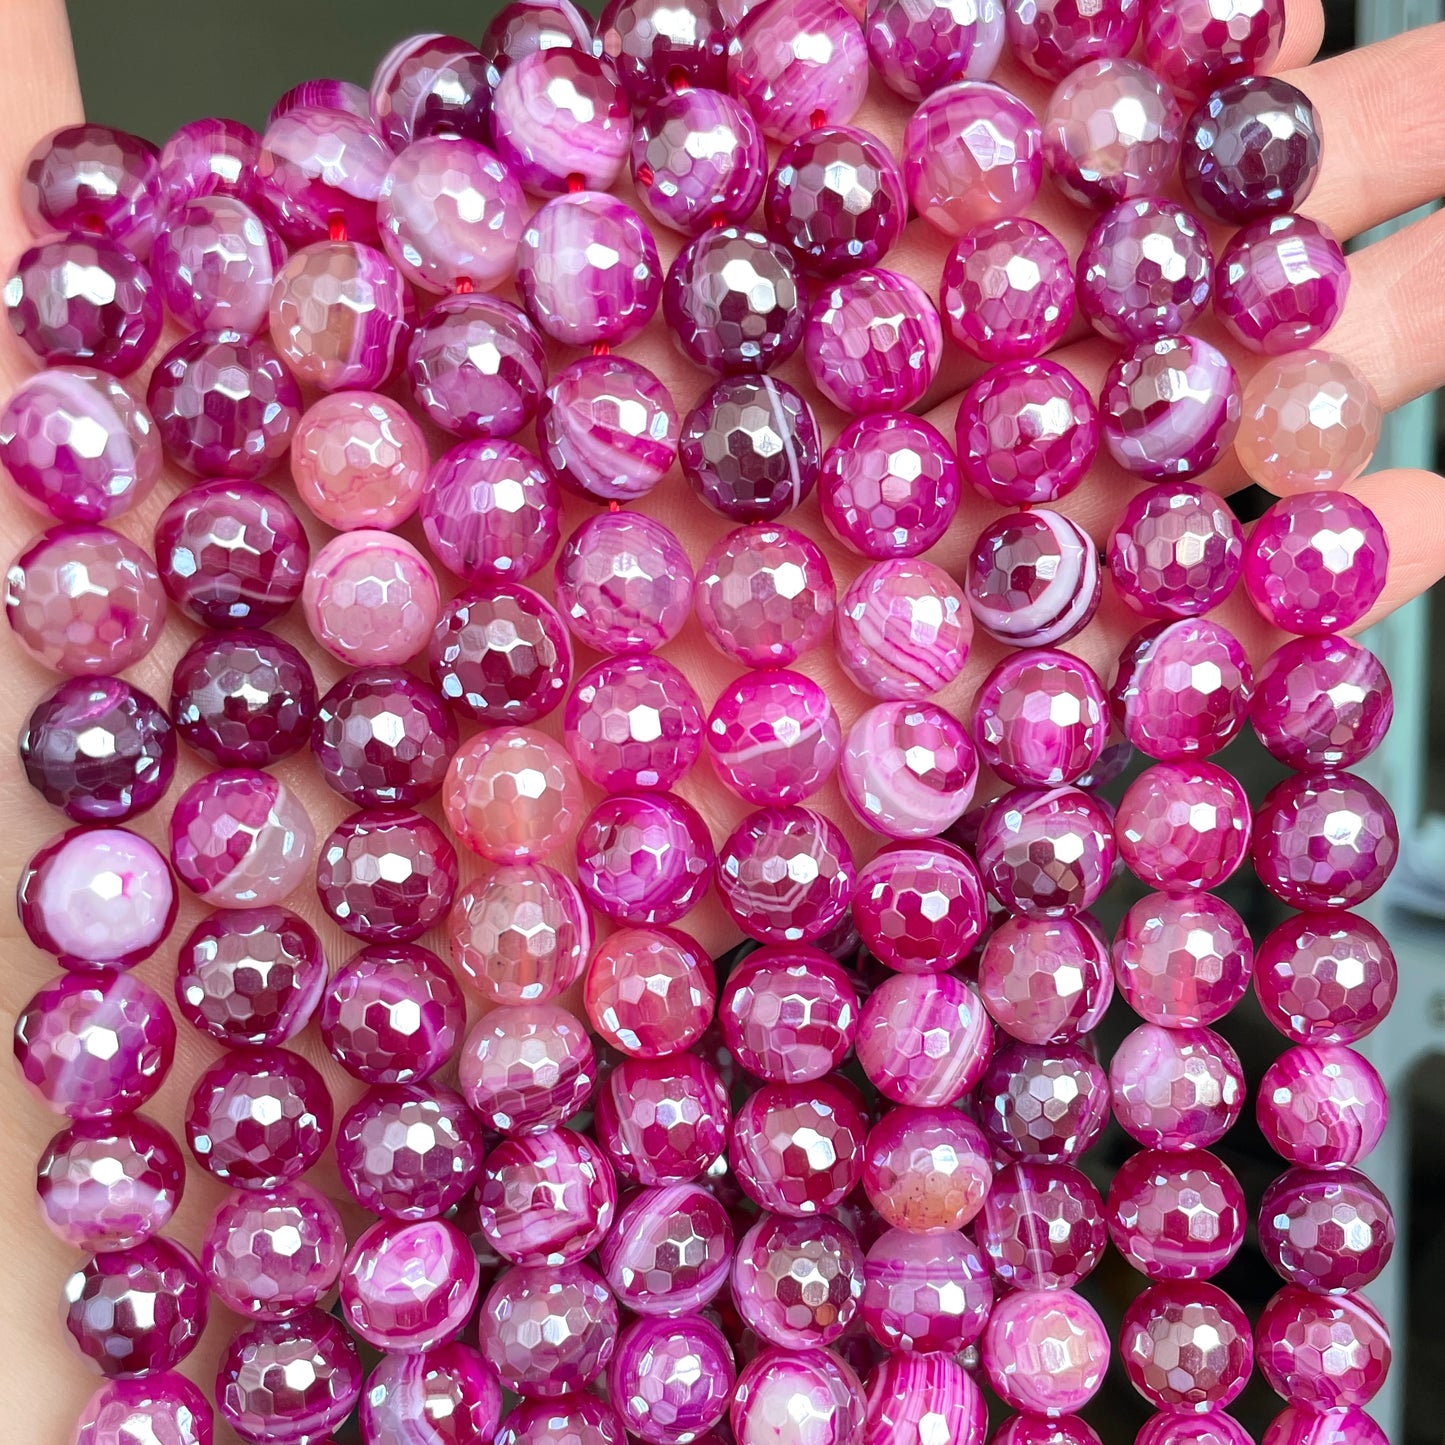 10, 12mm Electroplated Fuchsia Banded Agate Stone Faceted Beads-Grade A Premium Quality Electroplated Beads 12mm Stone Beads Breast Cancer Awareness New Beads Arrivals Premium Quality Agate Beads Charms Beads Beyond